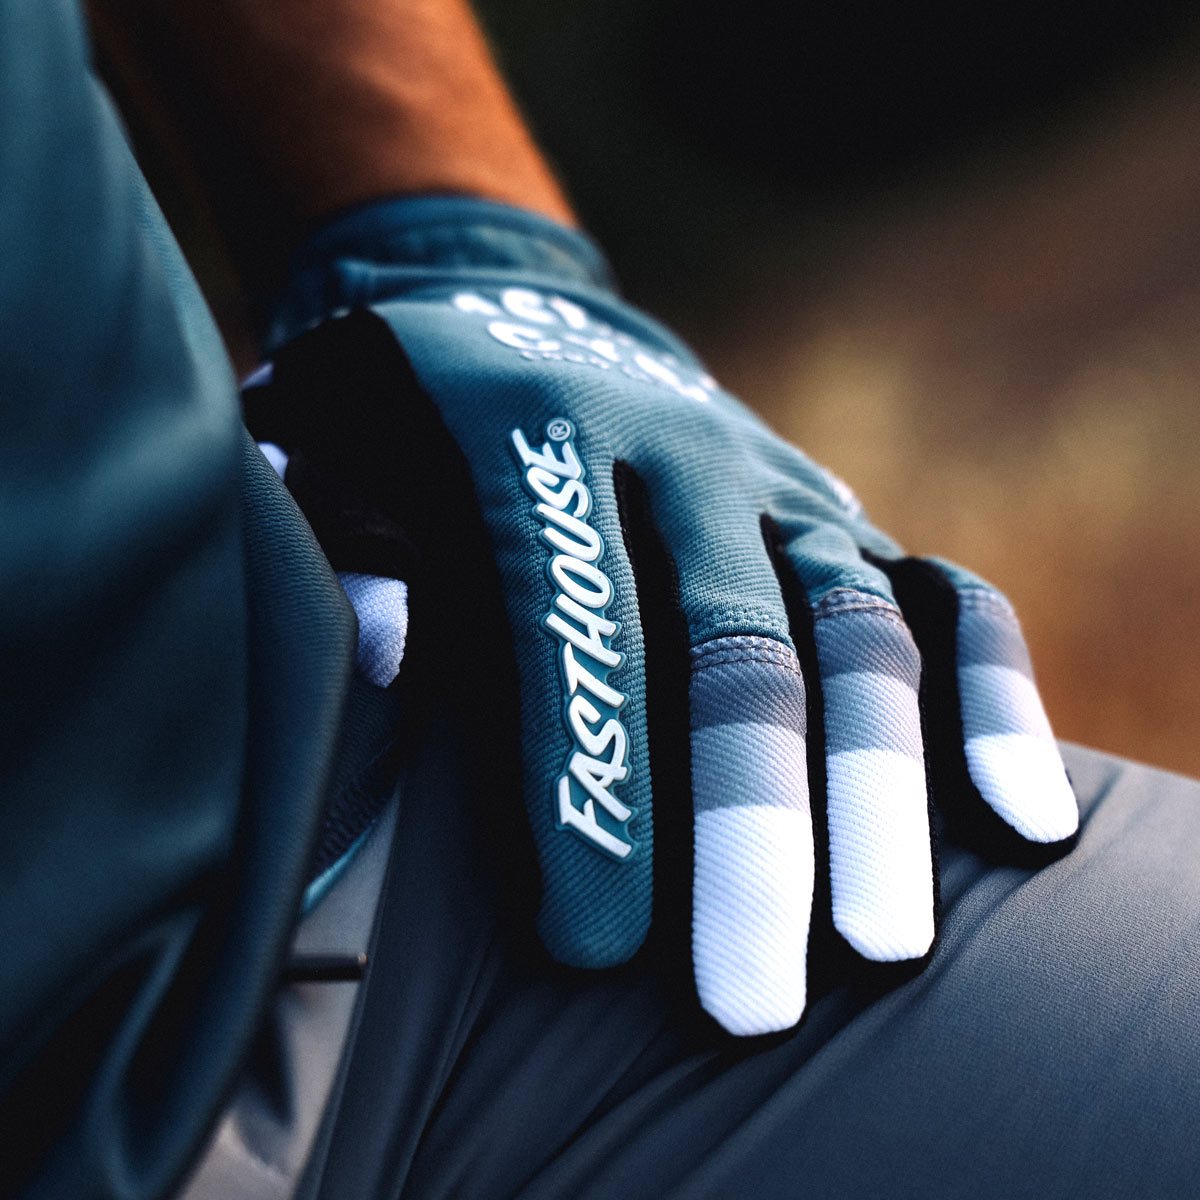 Speed Style Pacer Glove - Slate/White